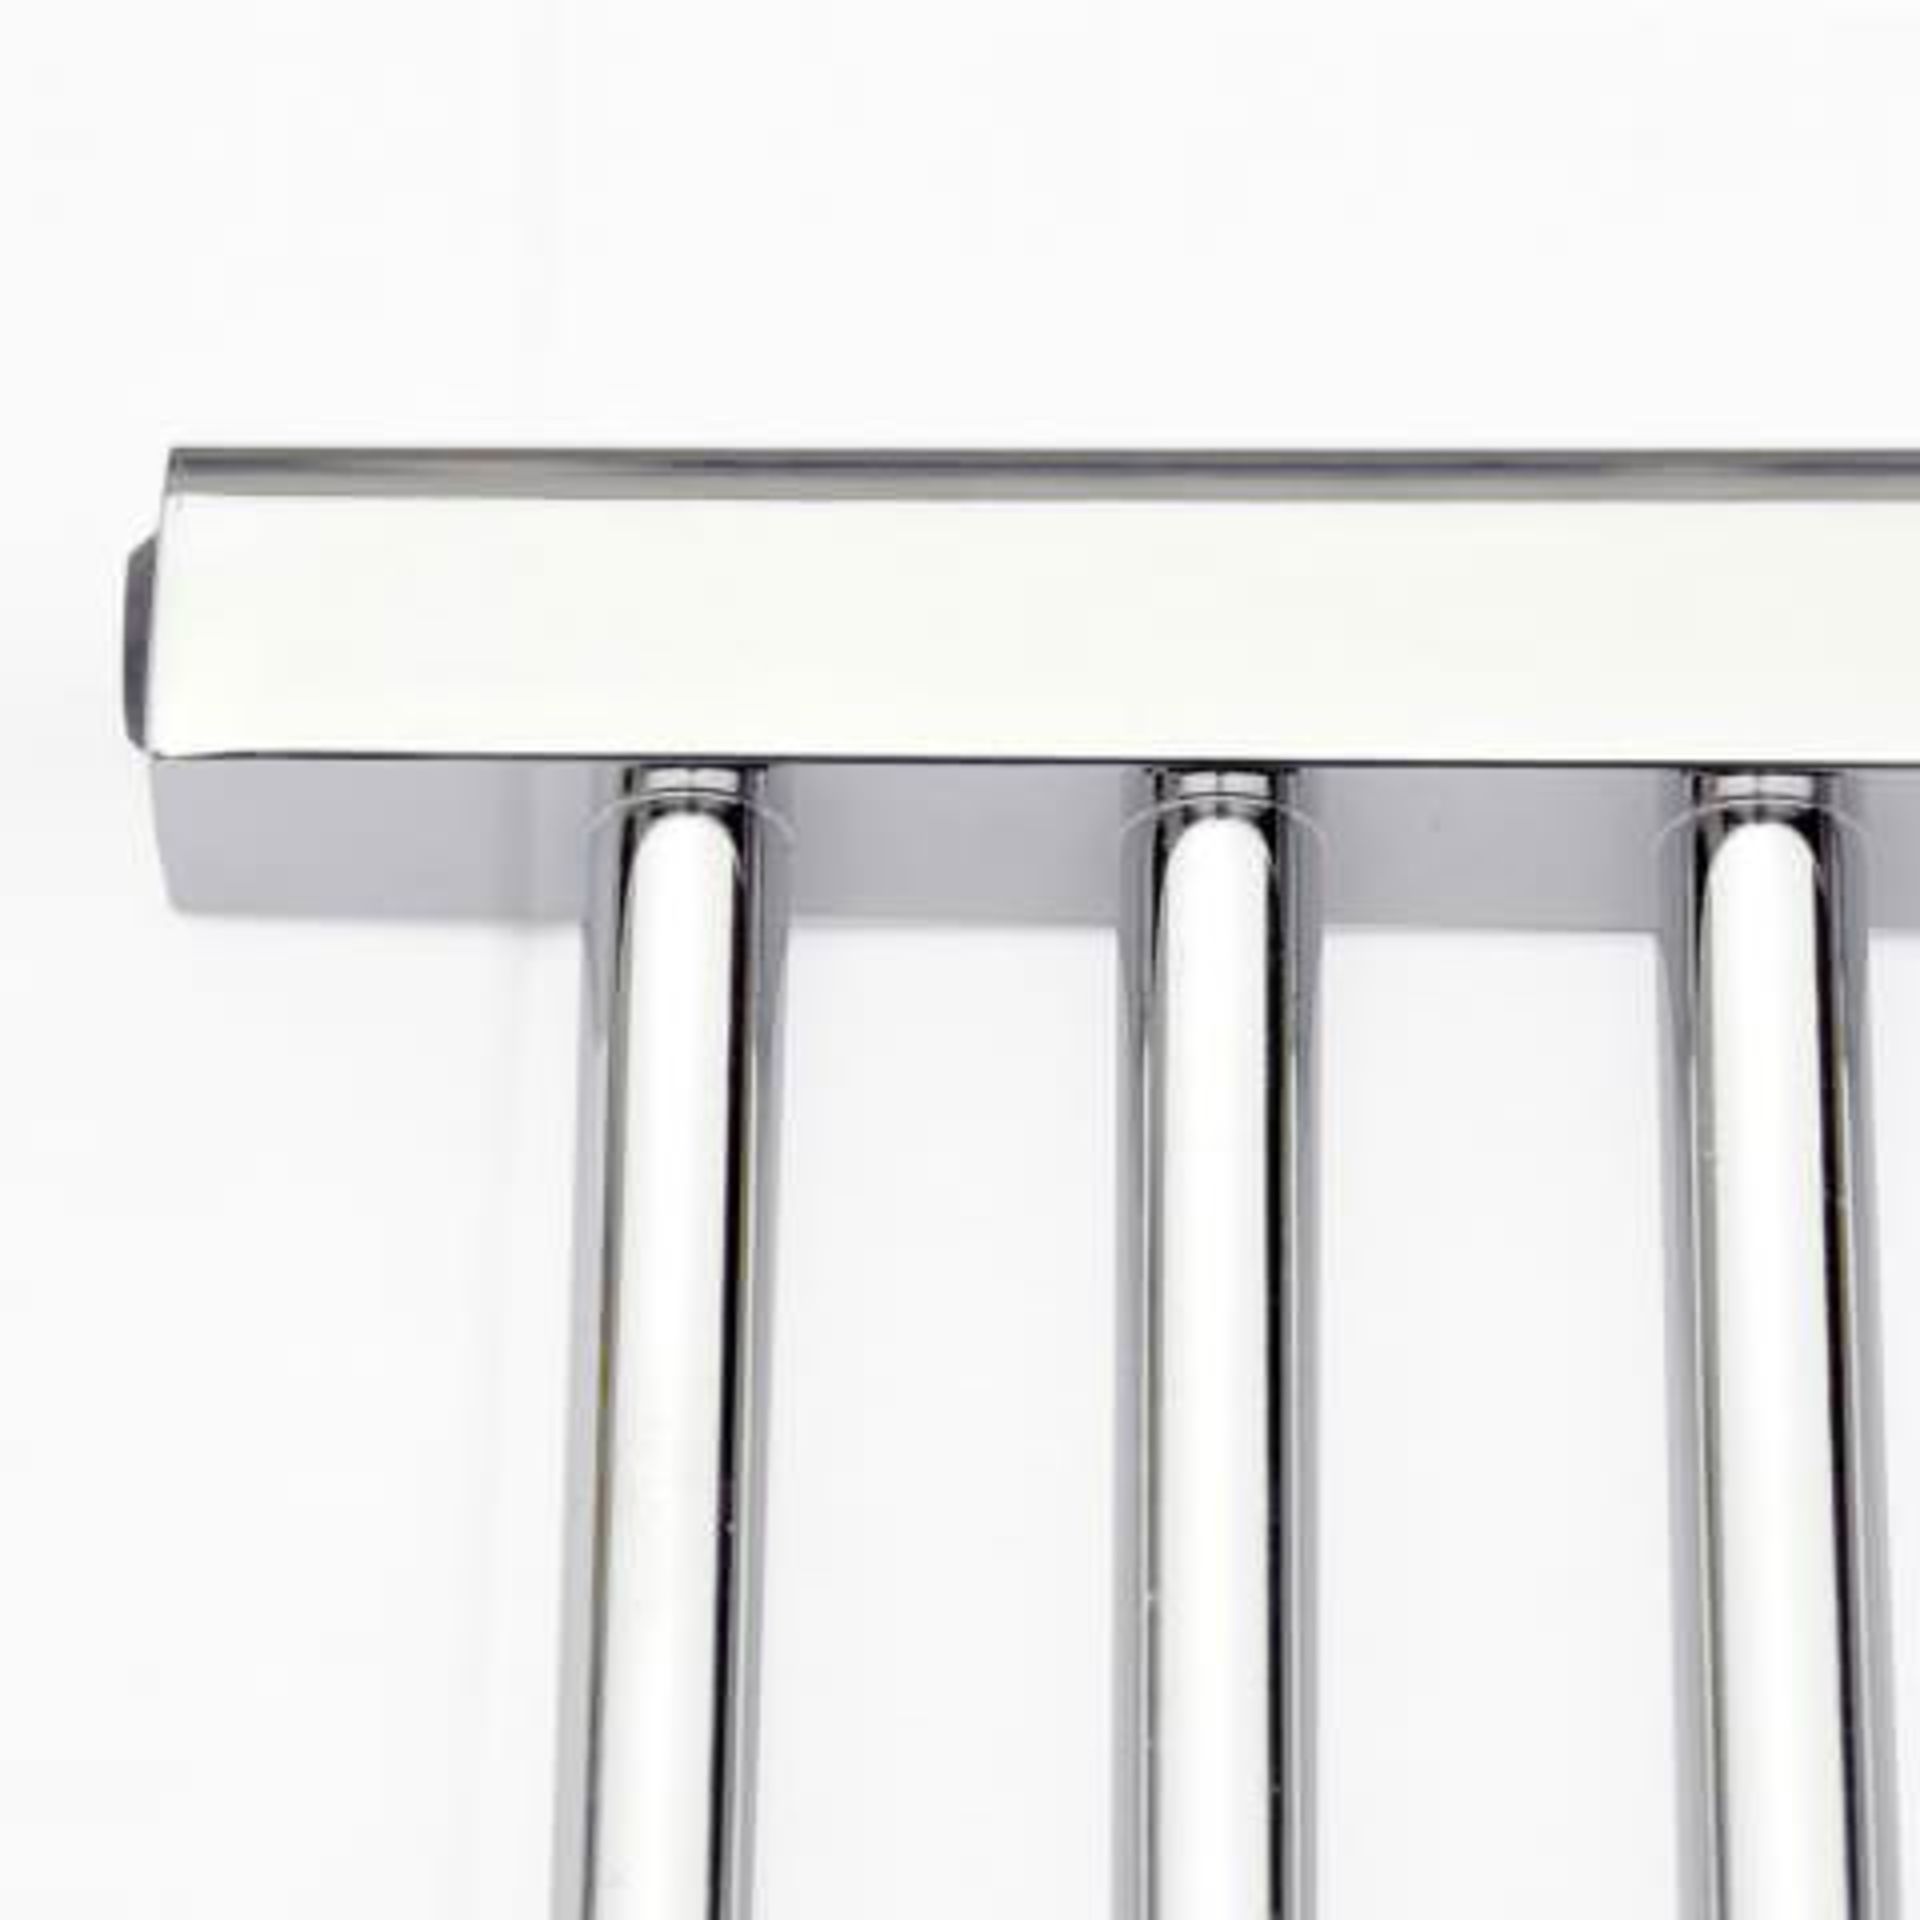 (A18) 1000x400mm - 20mm Tubes - Chrome Heated Straight Rail Ladder Towel Radiator Designer Touch For - Image 7 of 7